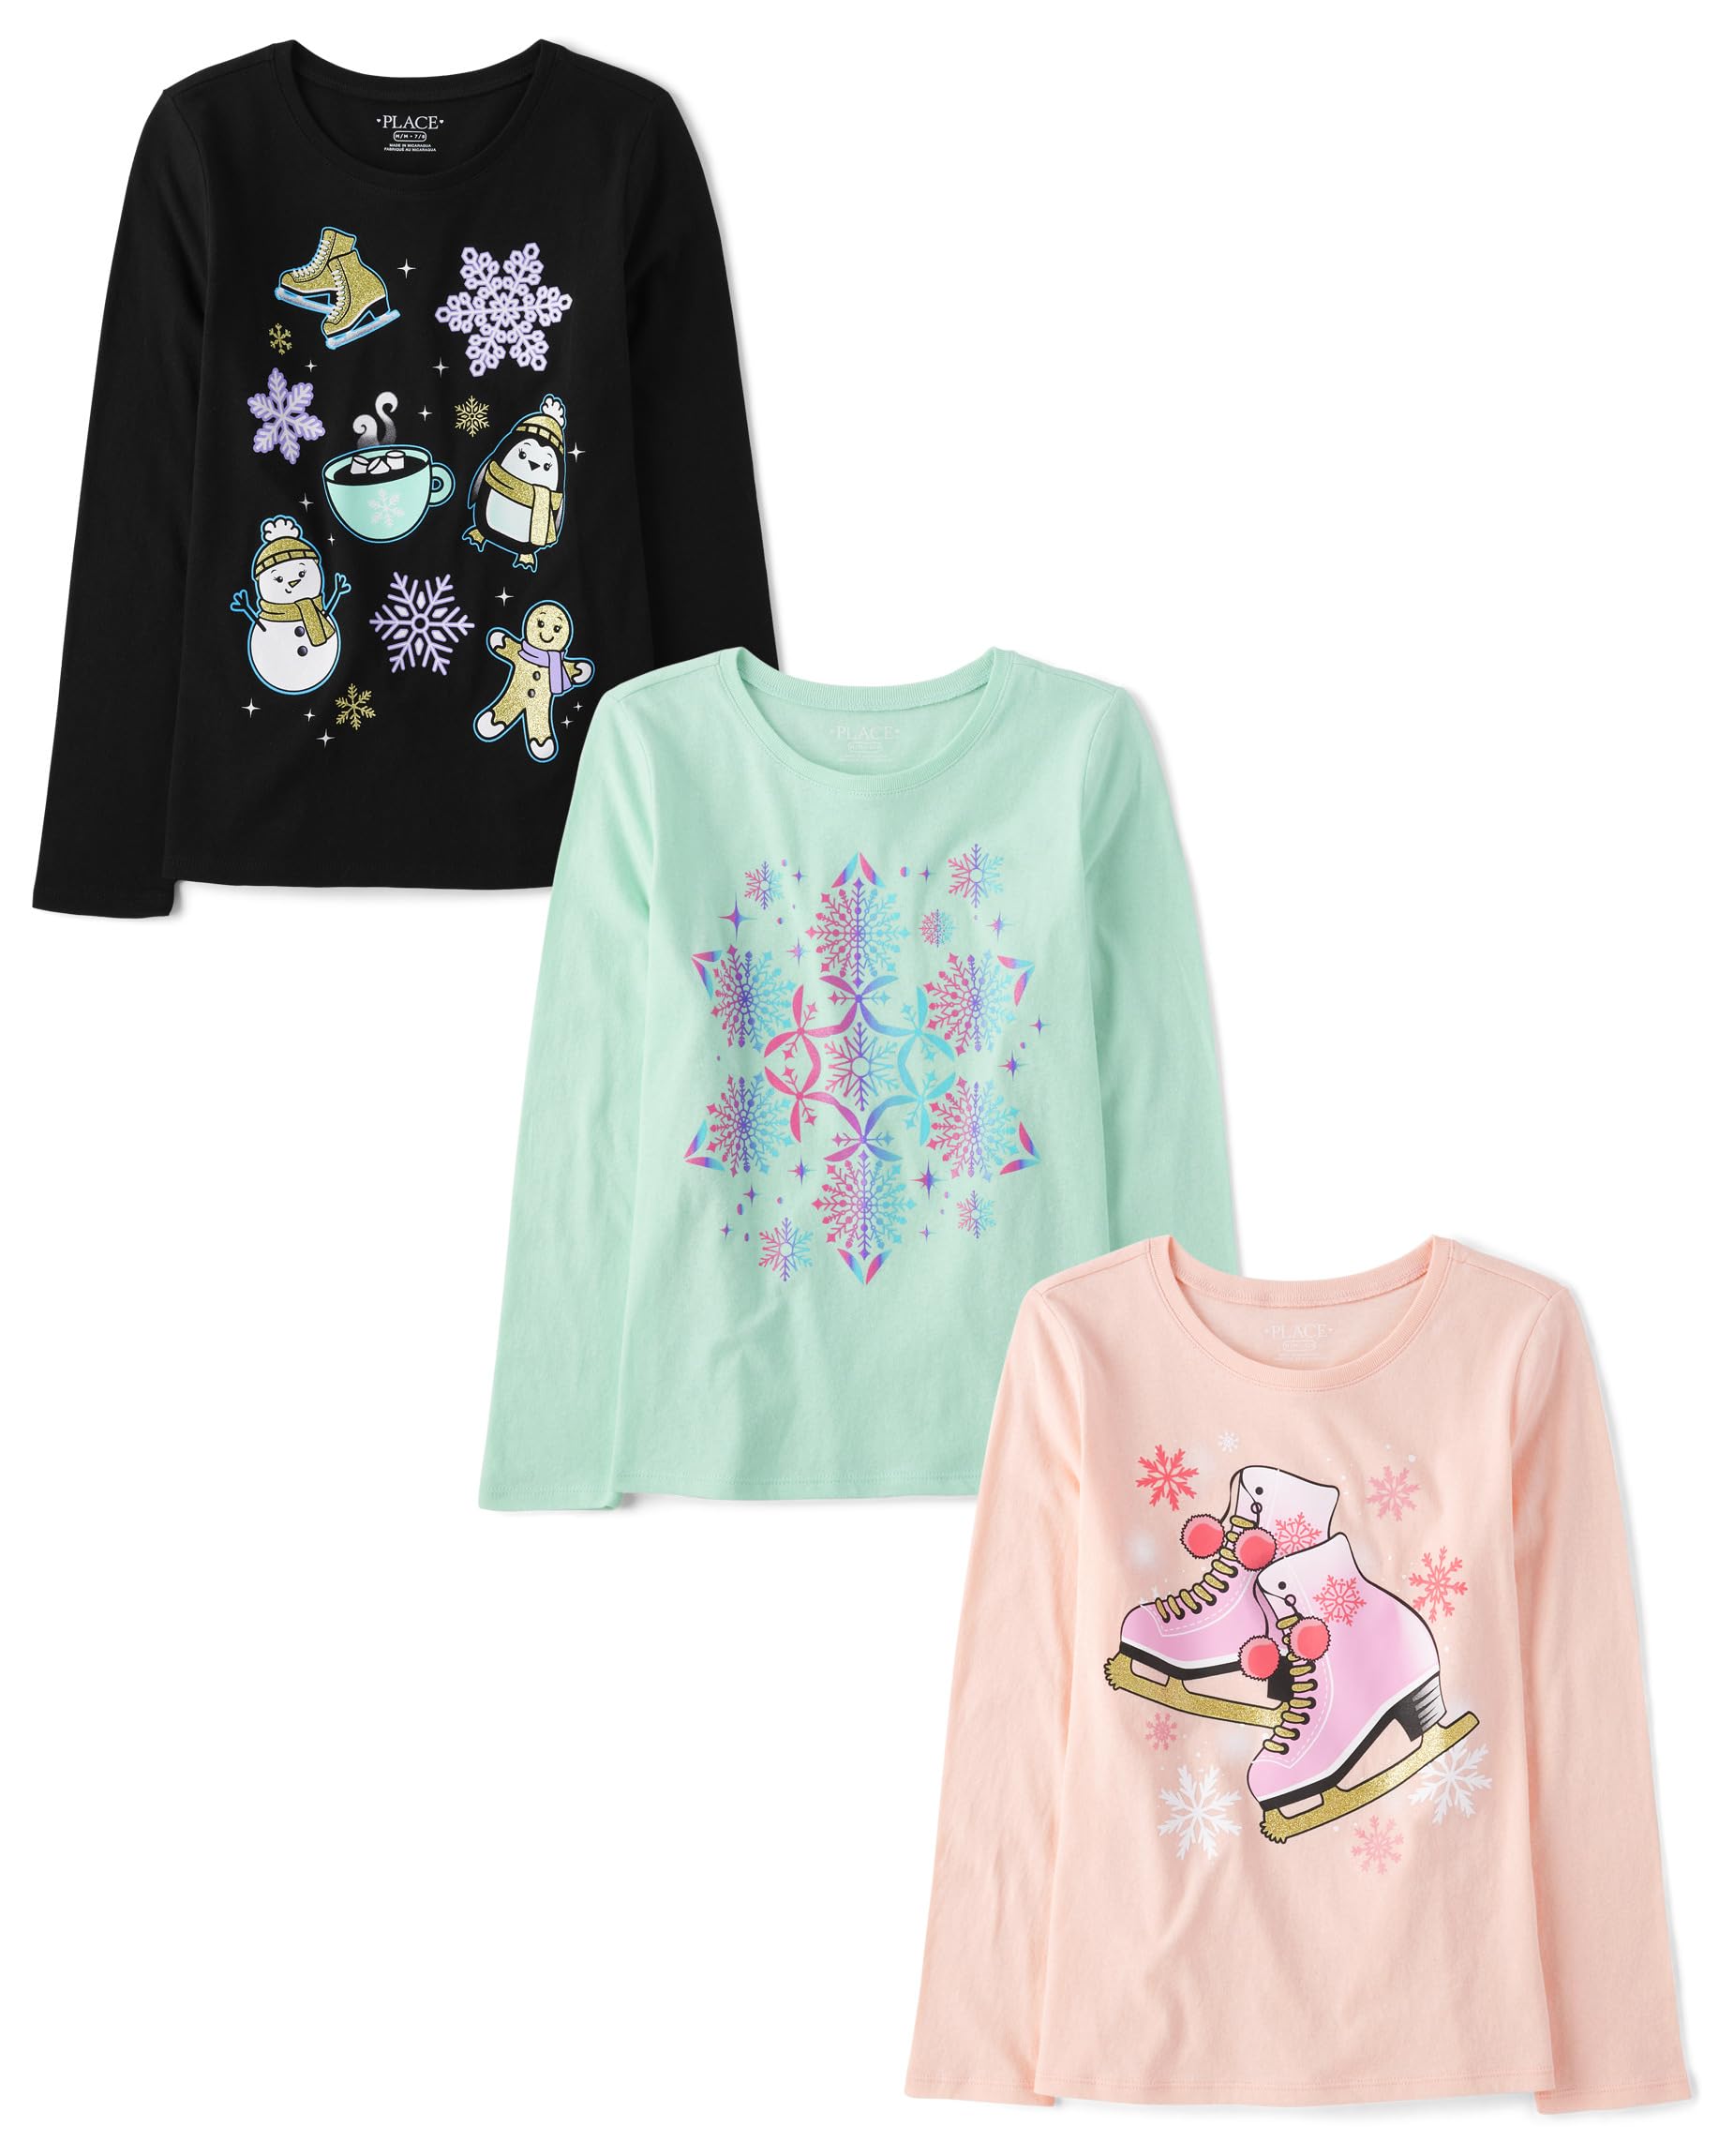 The Children's Place Girls' 3-Pack Long Sleeve Graphic T-Shirt